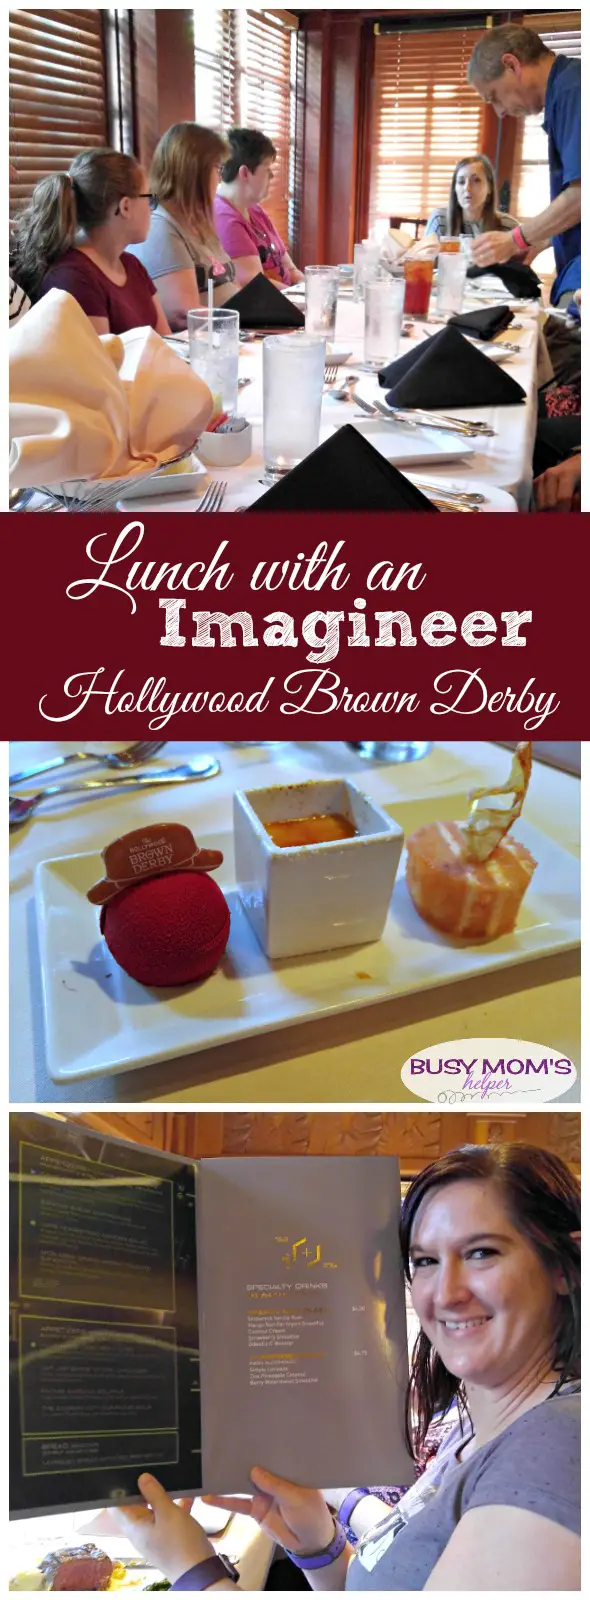 Lunch with an Imagineer at Hollywood Brown Derby / Walt Disney World Orlando / Hollywood Studios / a great experience to dine with an Imagineer